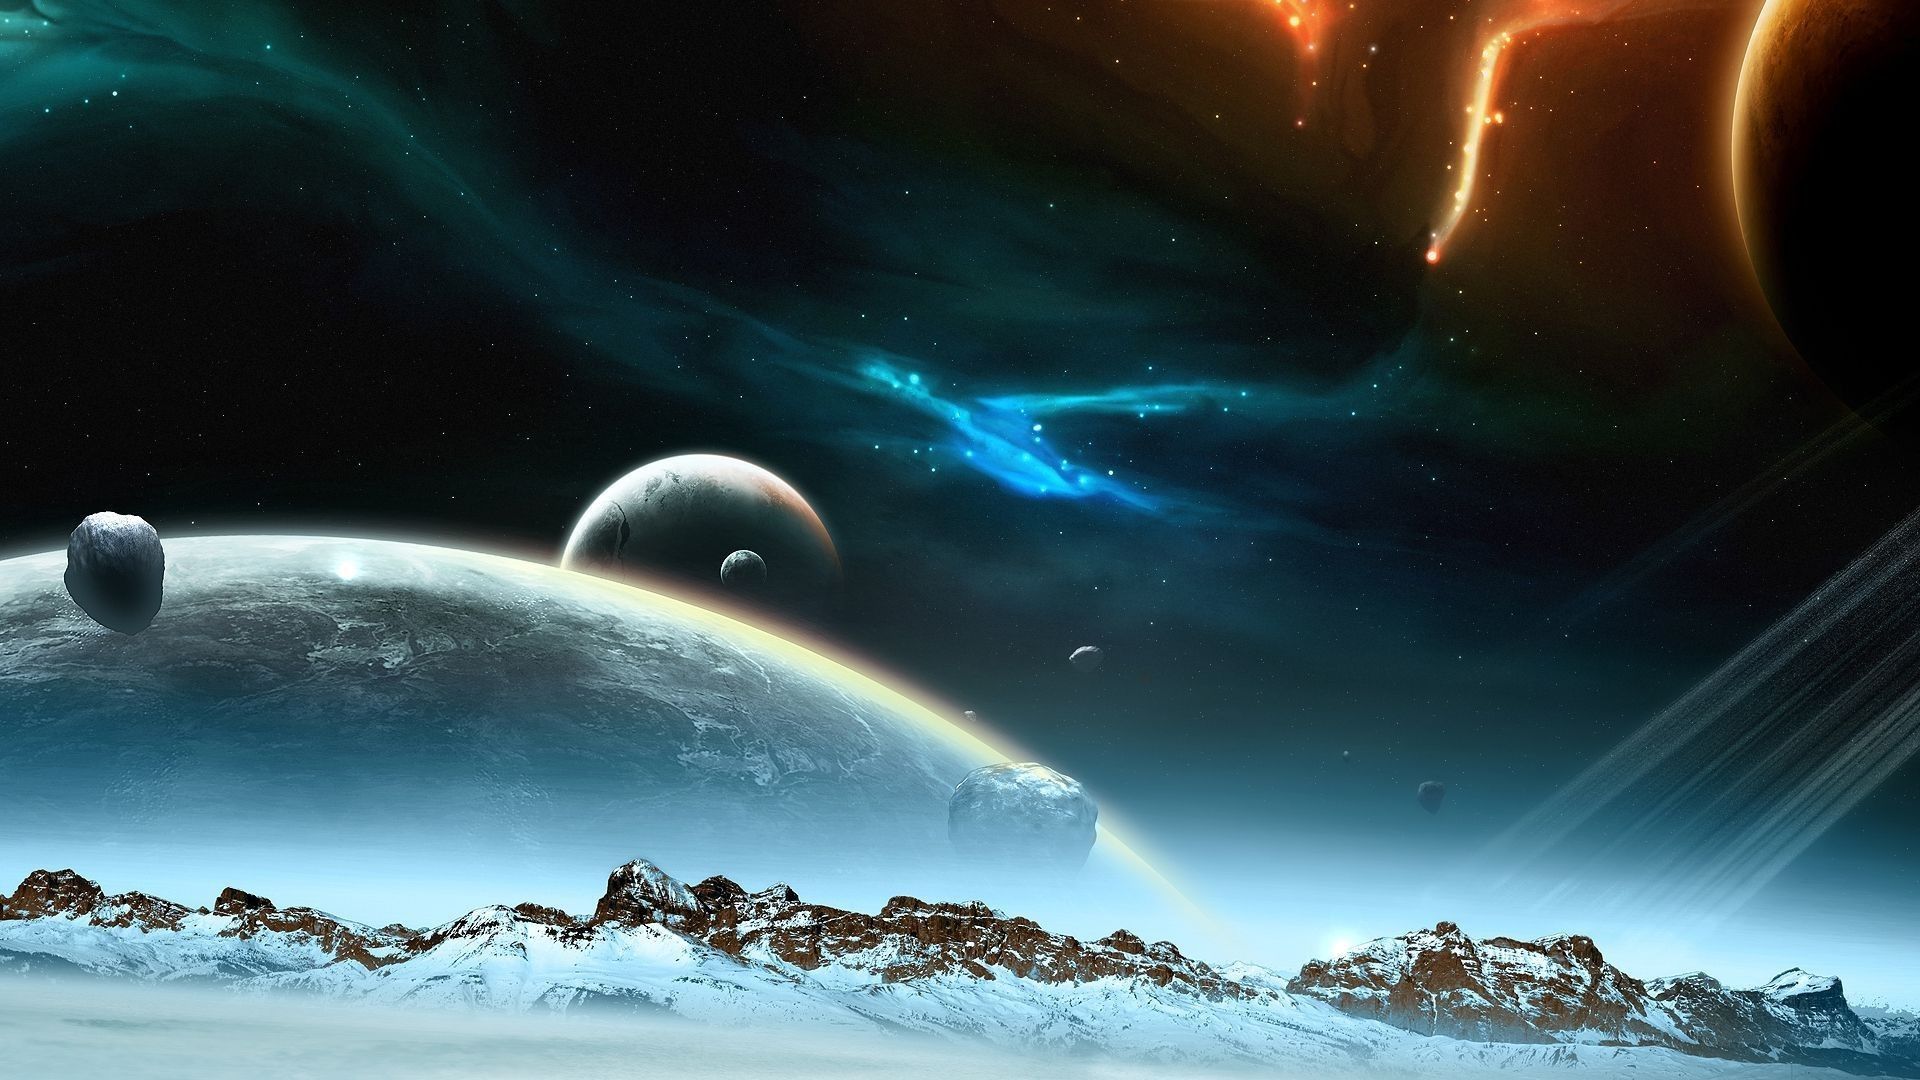 Space Fantasy wallpaper wallpaper Collections